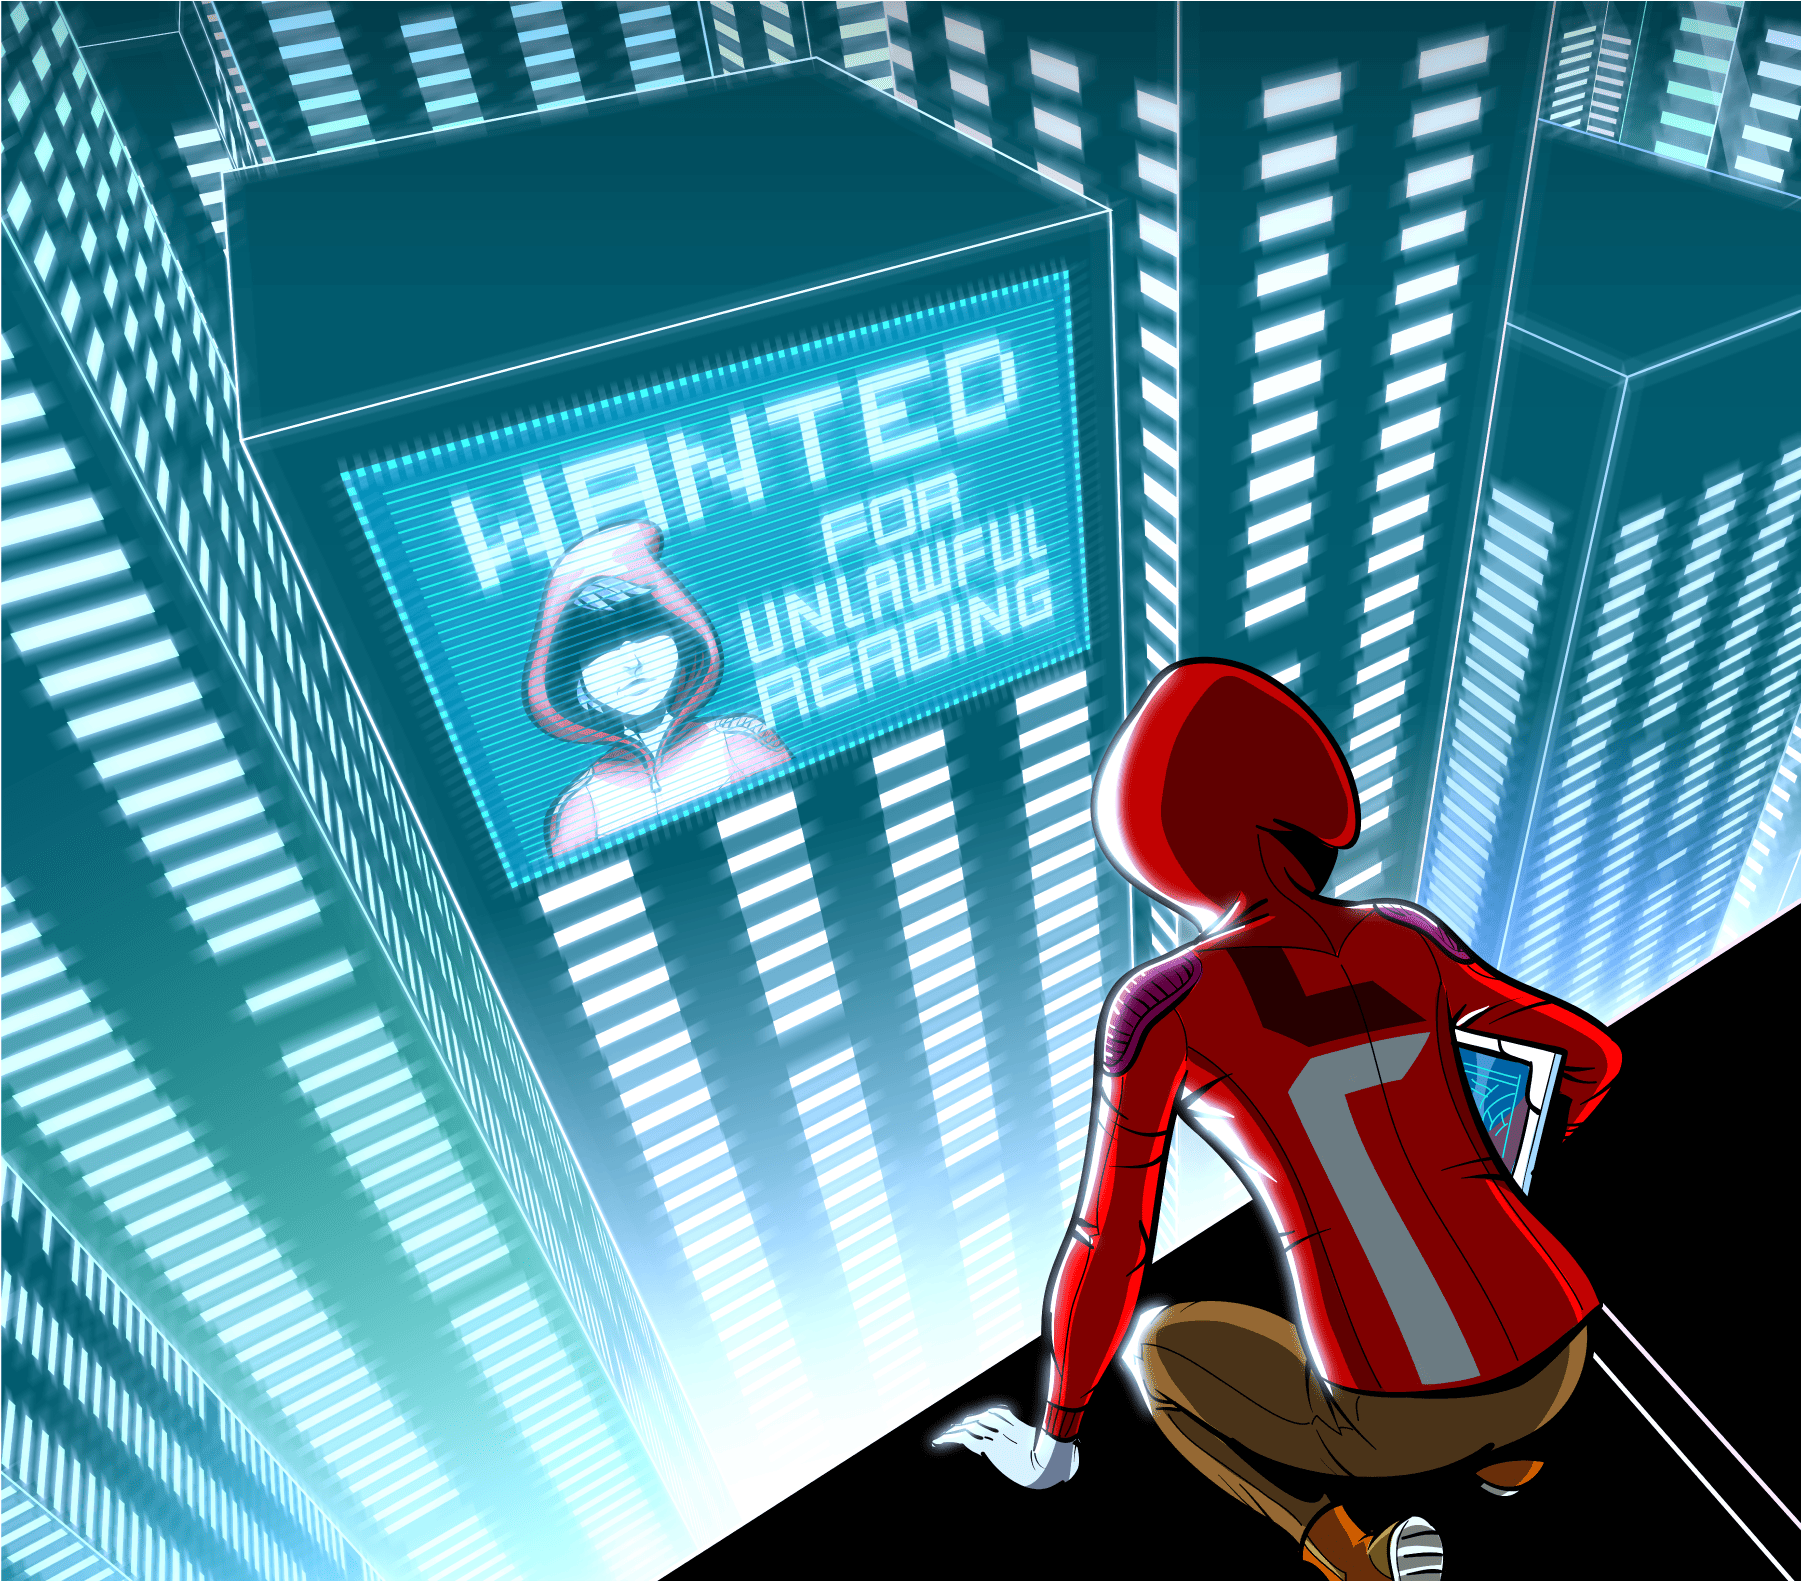 A person in a red hooded outfit sits near skyscrapers at night, looking at a digital billboard displaying a 